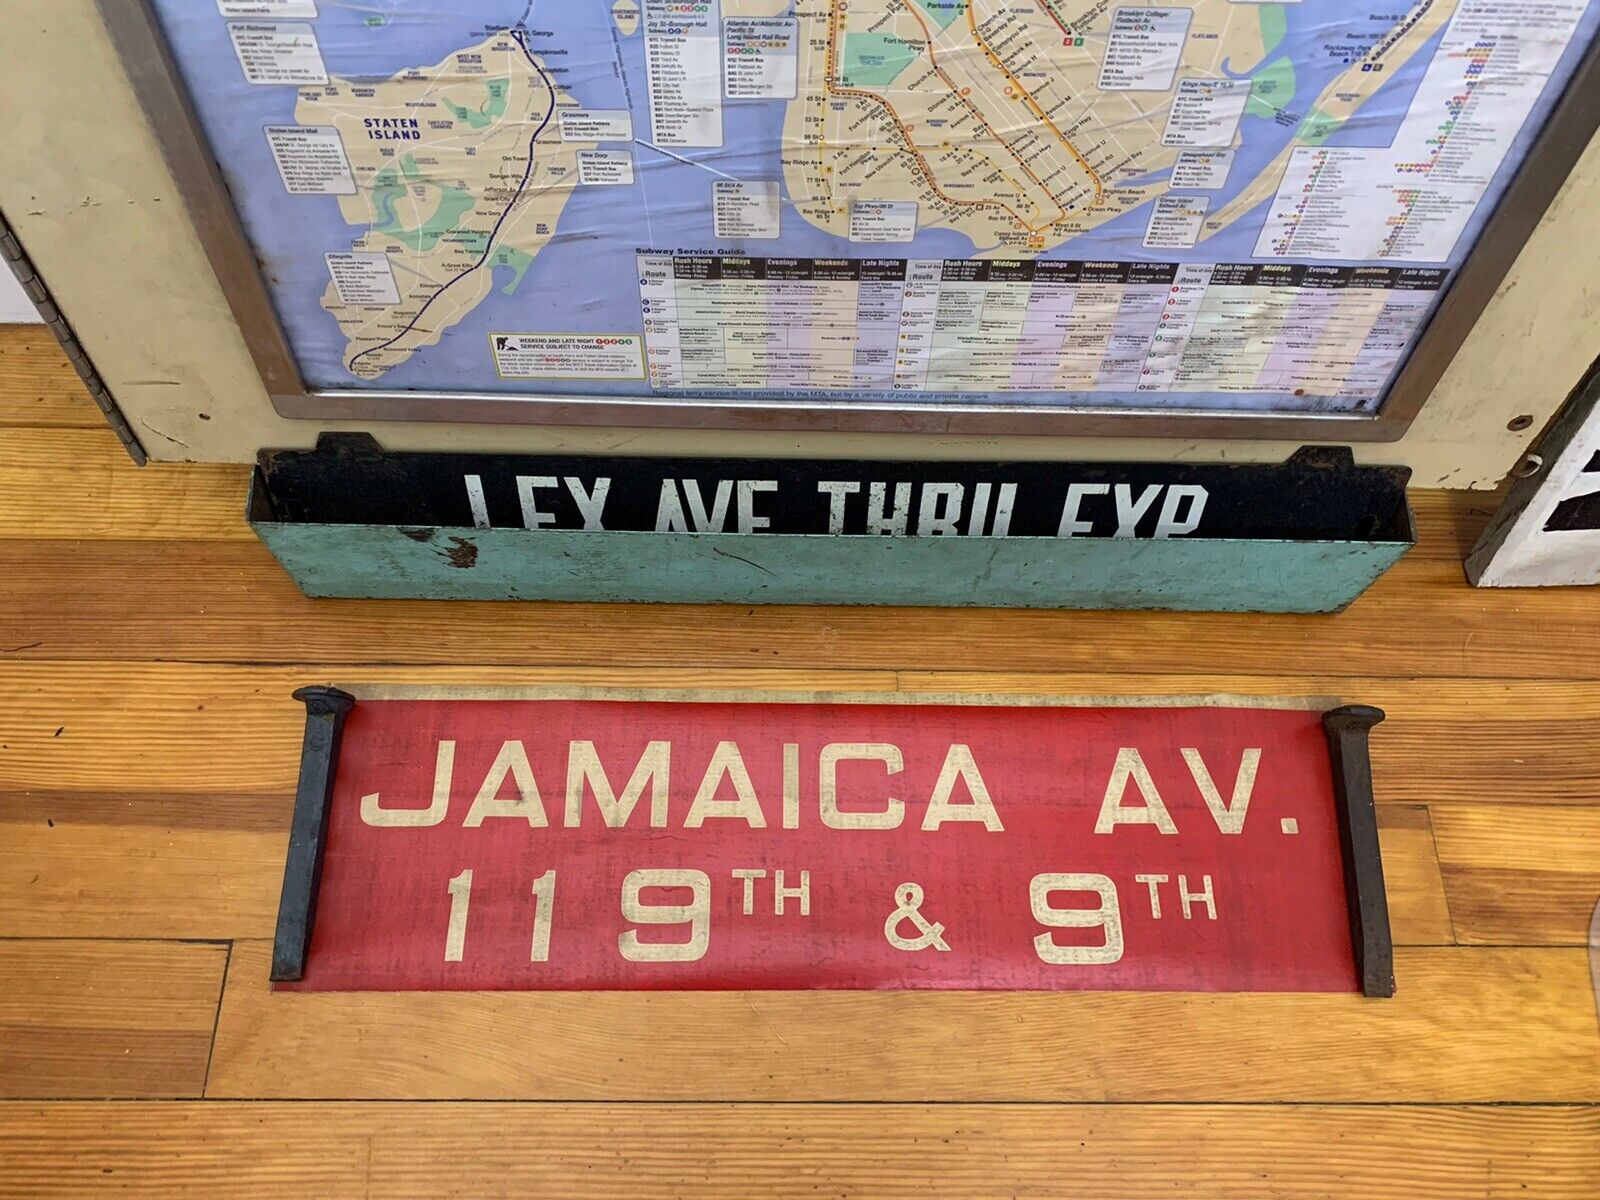 QUEENS TRANSIT NY 1952 NYC BUS ROLL SIGN COLLECTIBLE JAMAICA AVENUE 119th 9 ART